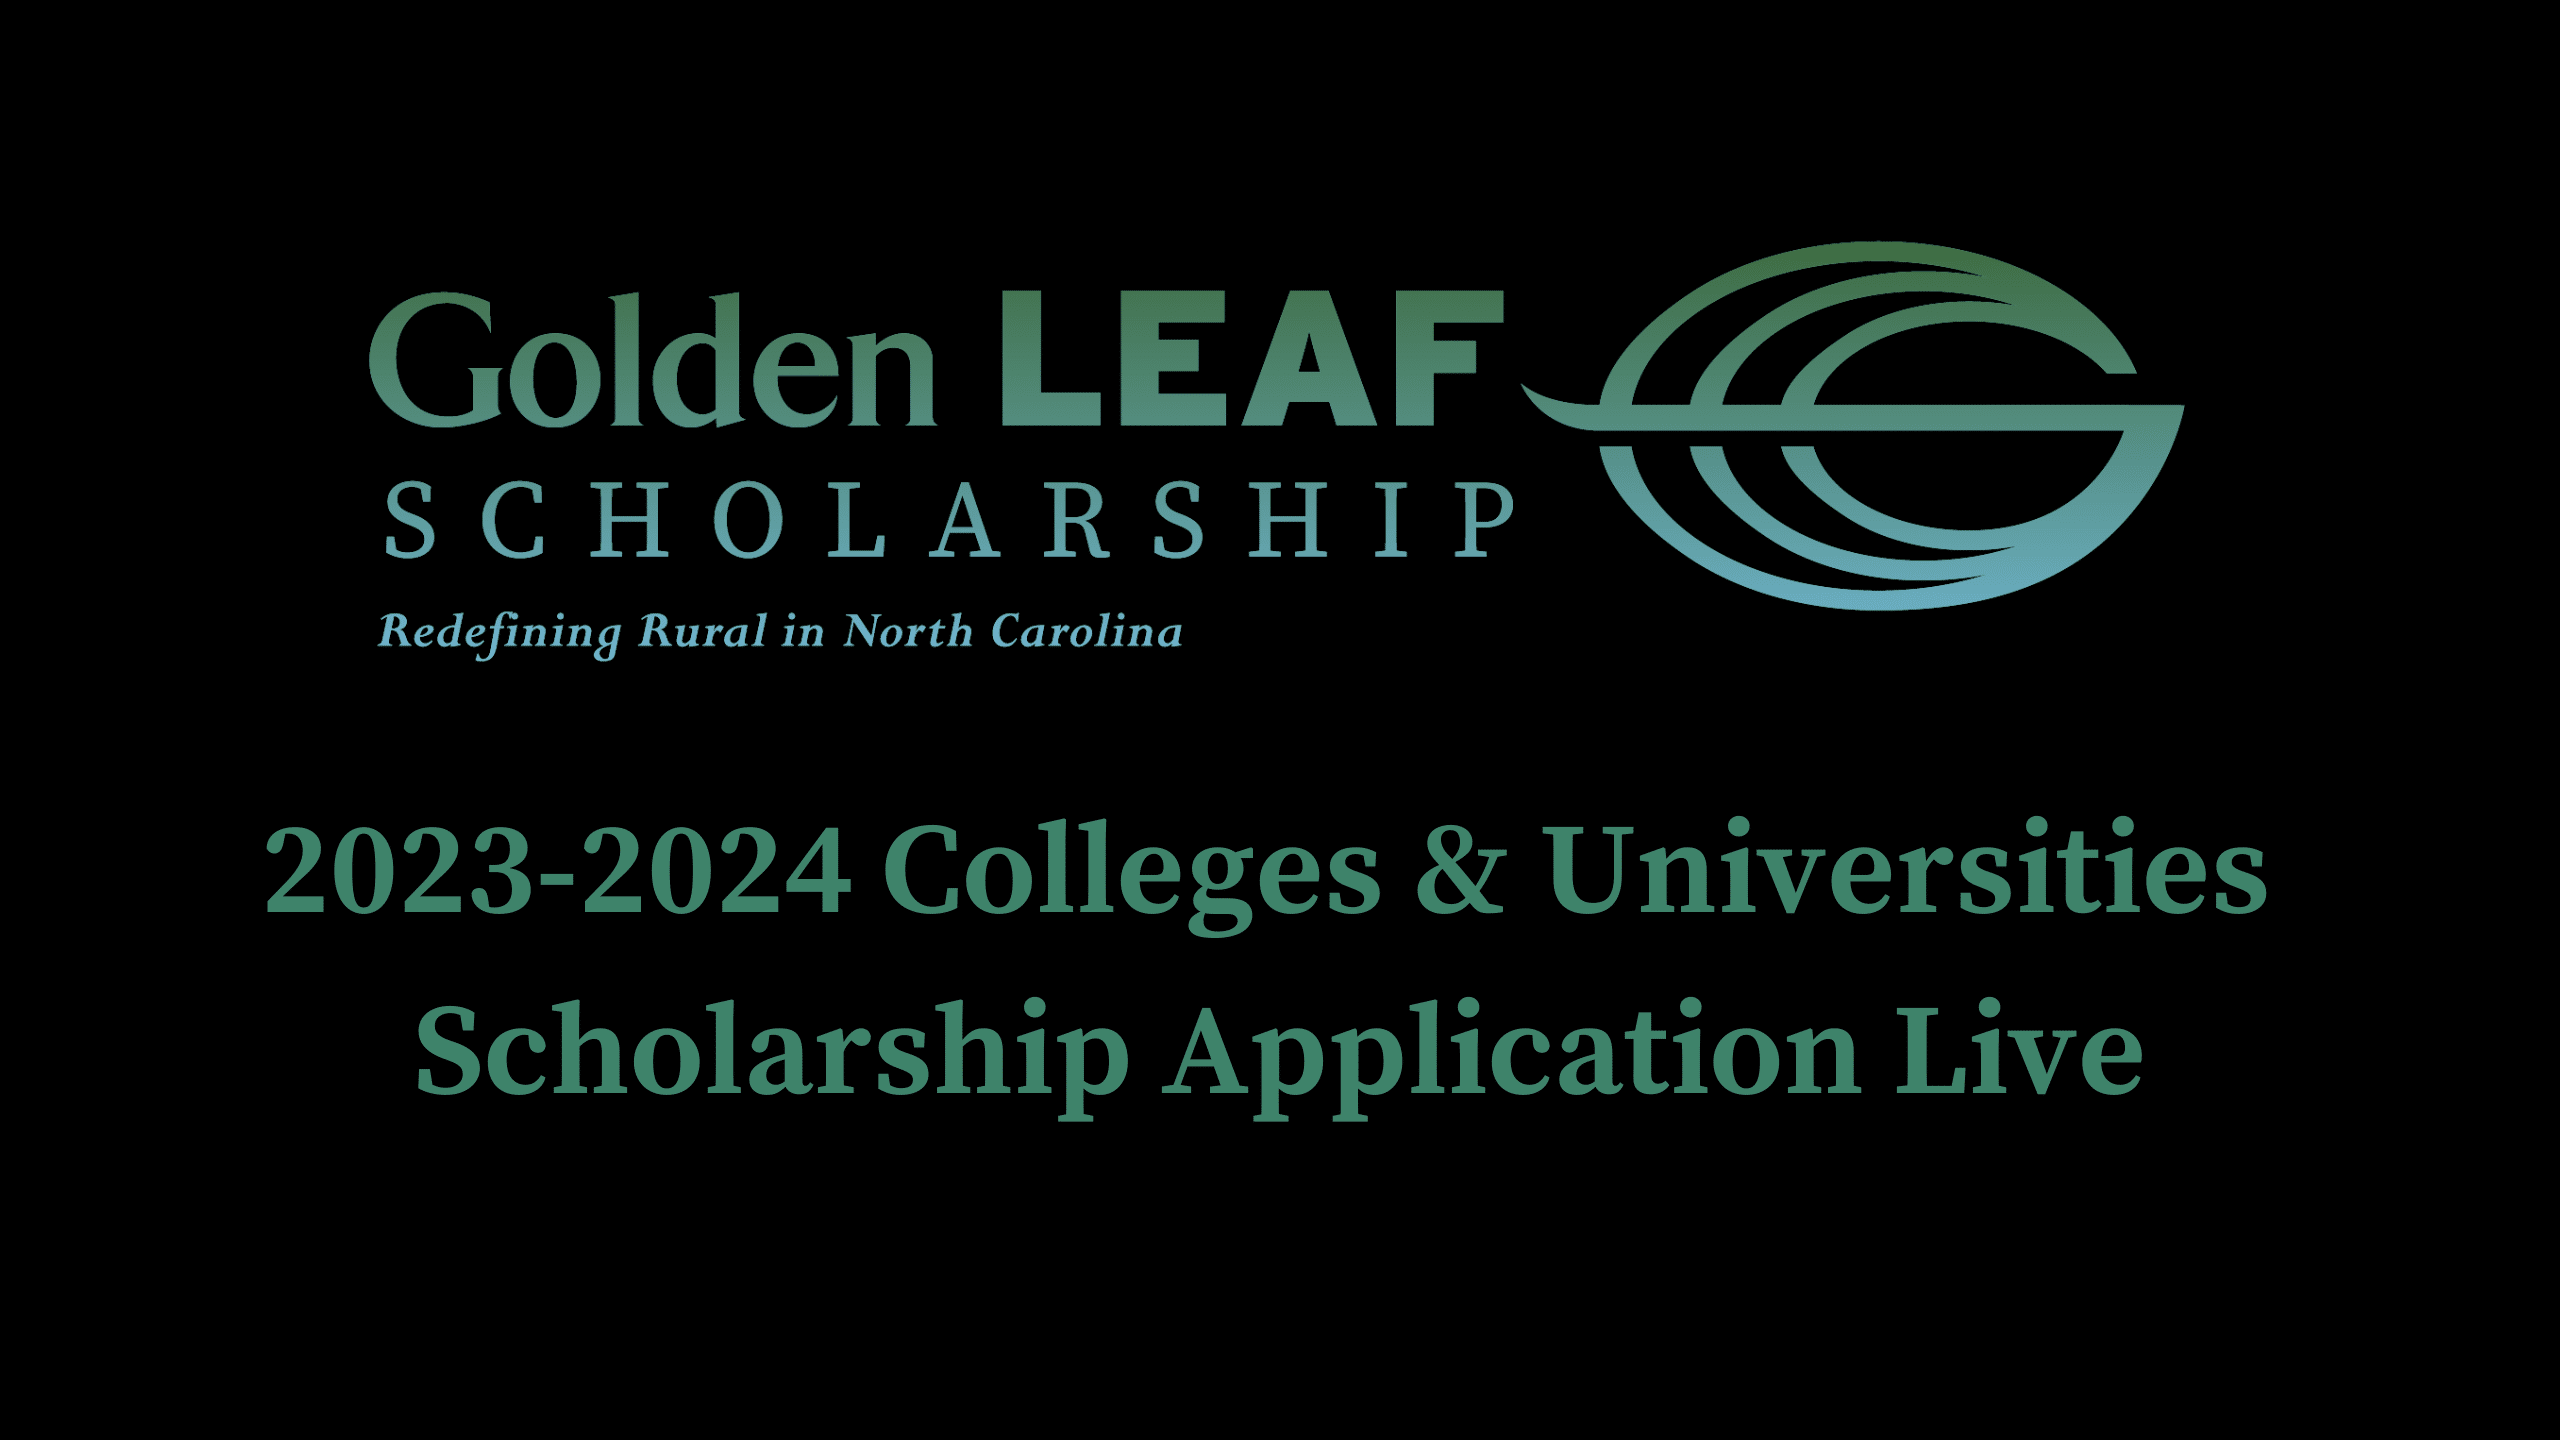 Applications for Golden LEAF Colleges and Universities Scholarship are due March 1, 2023